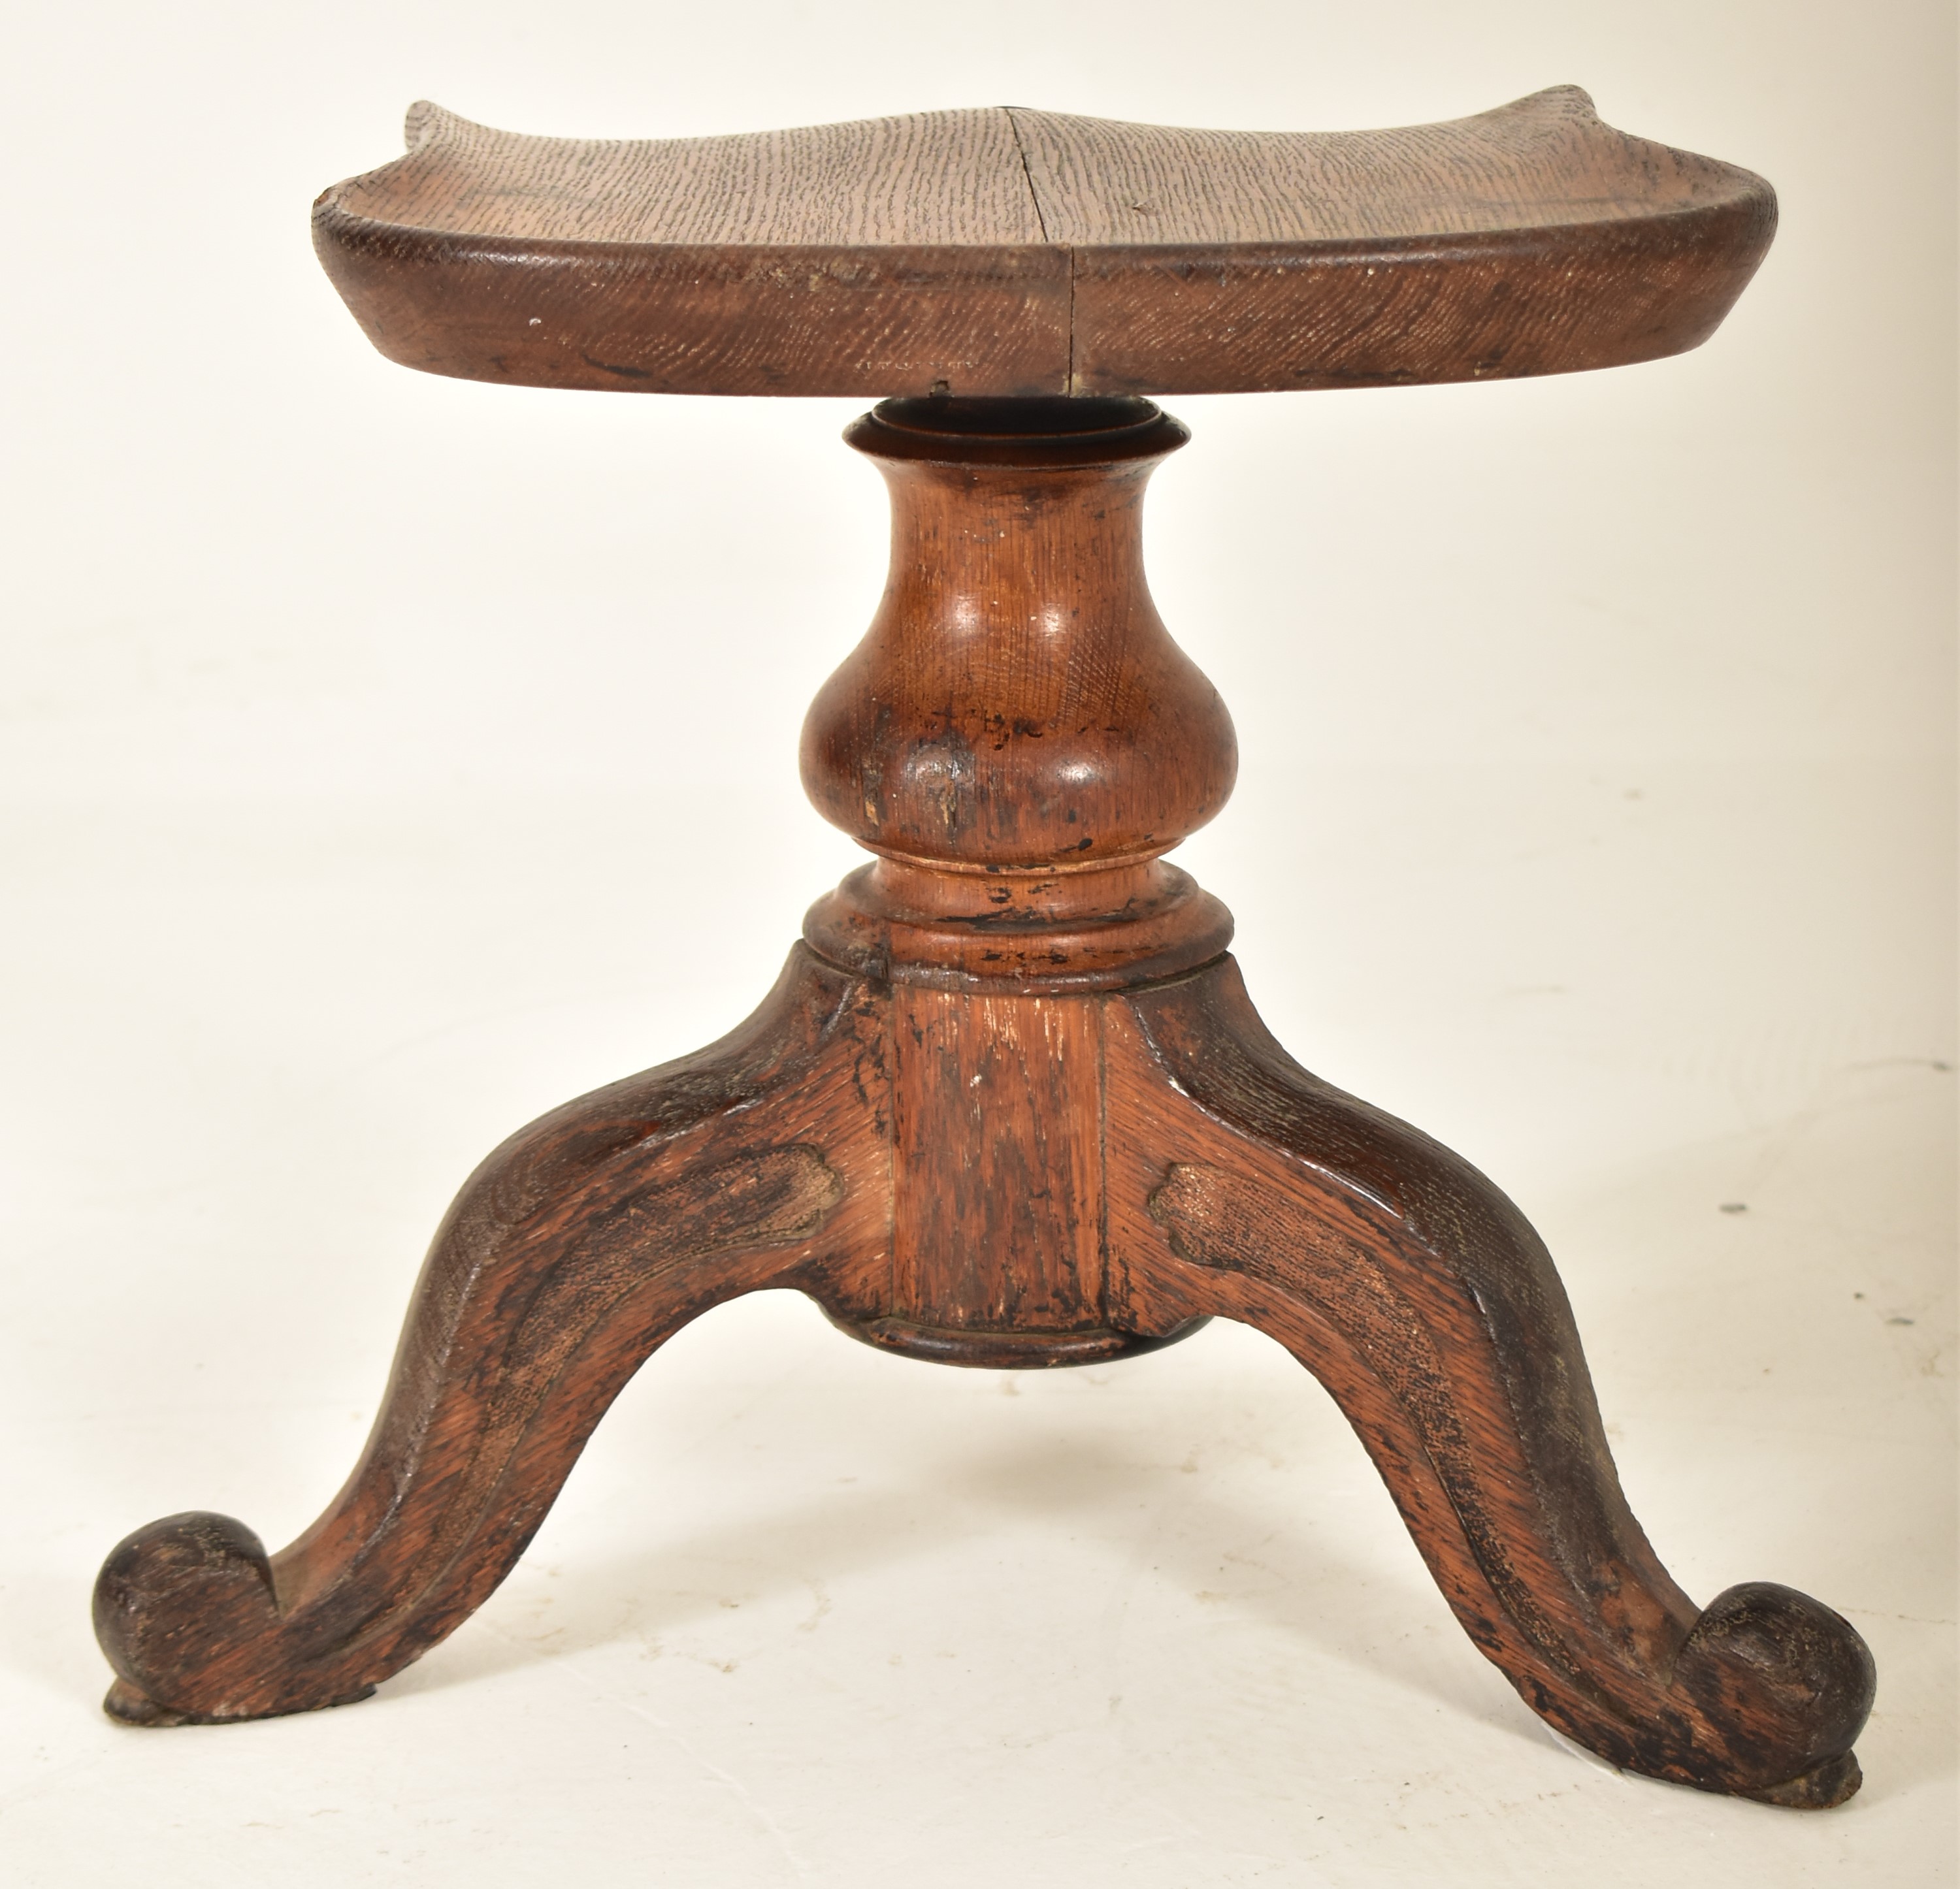 VICTORIAN 19TH CENTURY CARVED OAK PIANO STOOL - Image 4 of 4